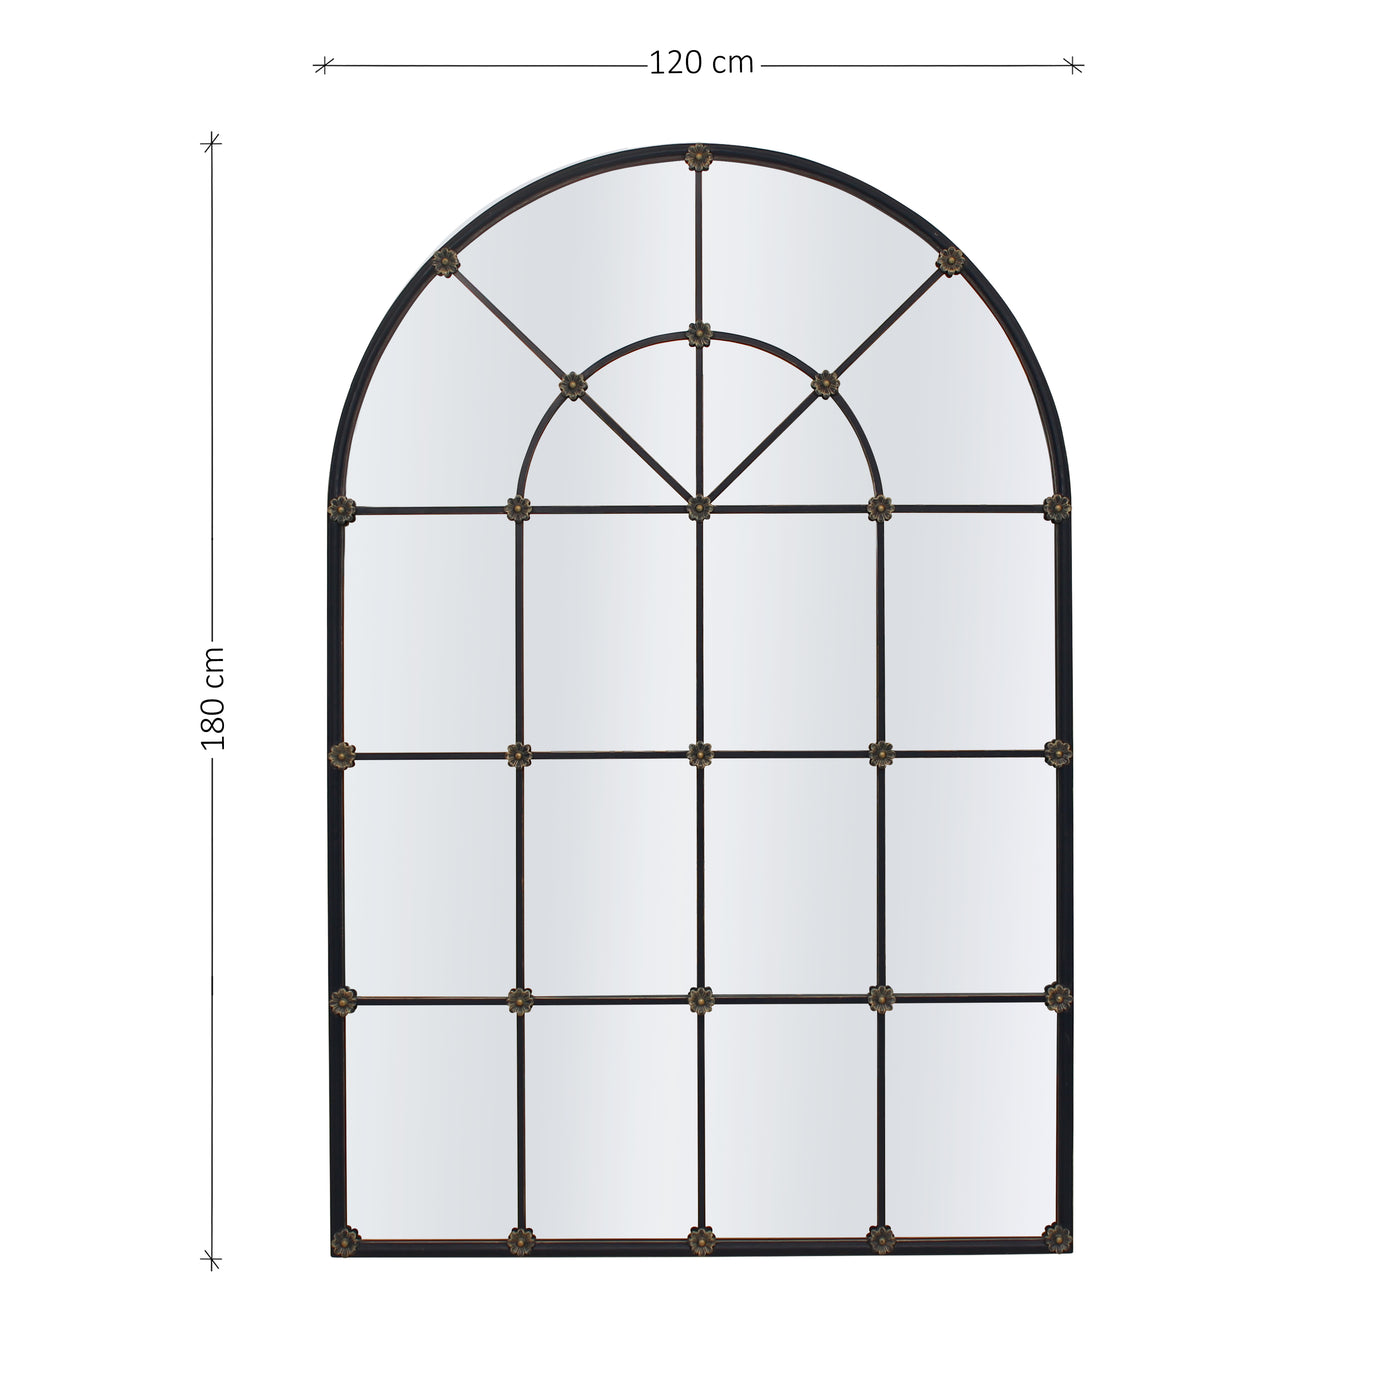 Decorative arched mirror in dark blue finish with annotated dimensions